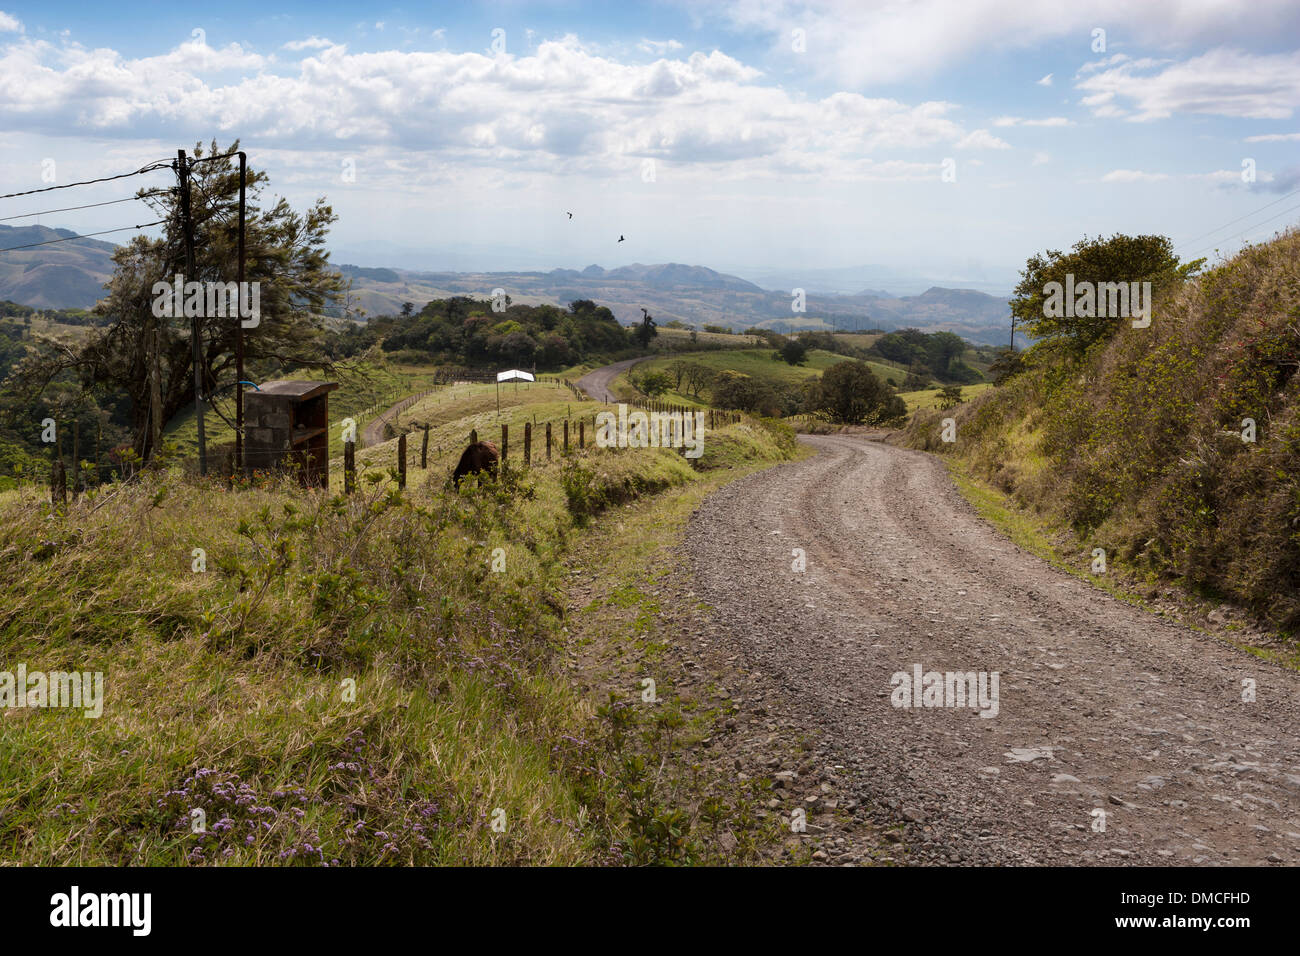 Rolling farm country in central Costa Rica. Stock Photo